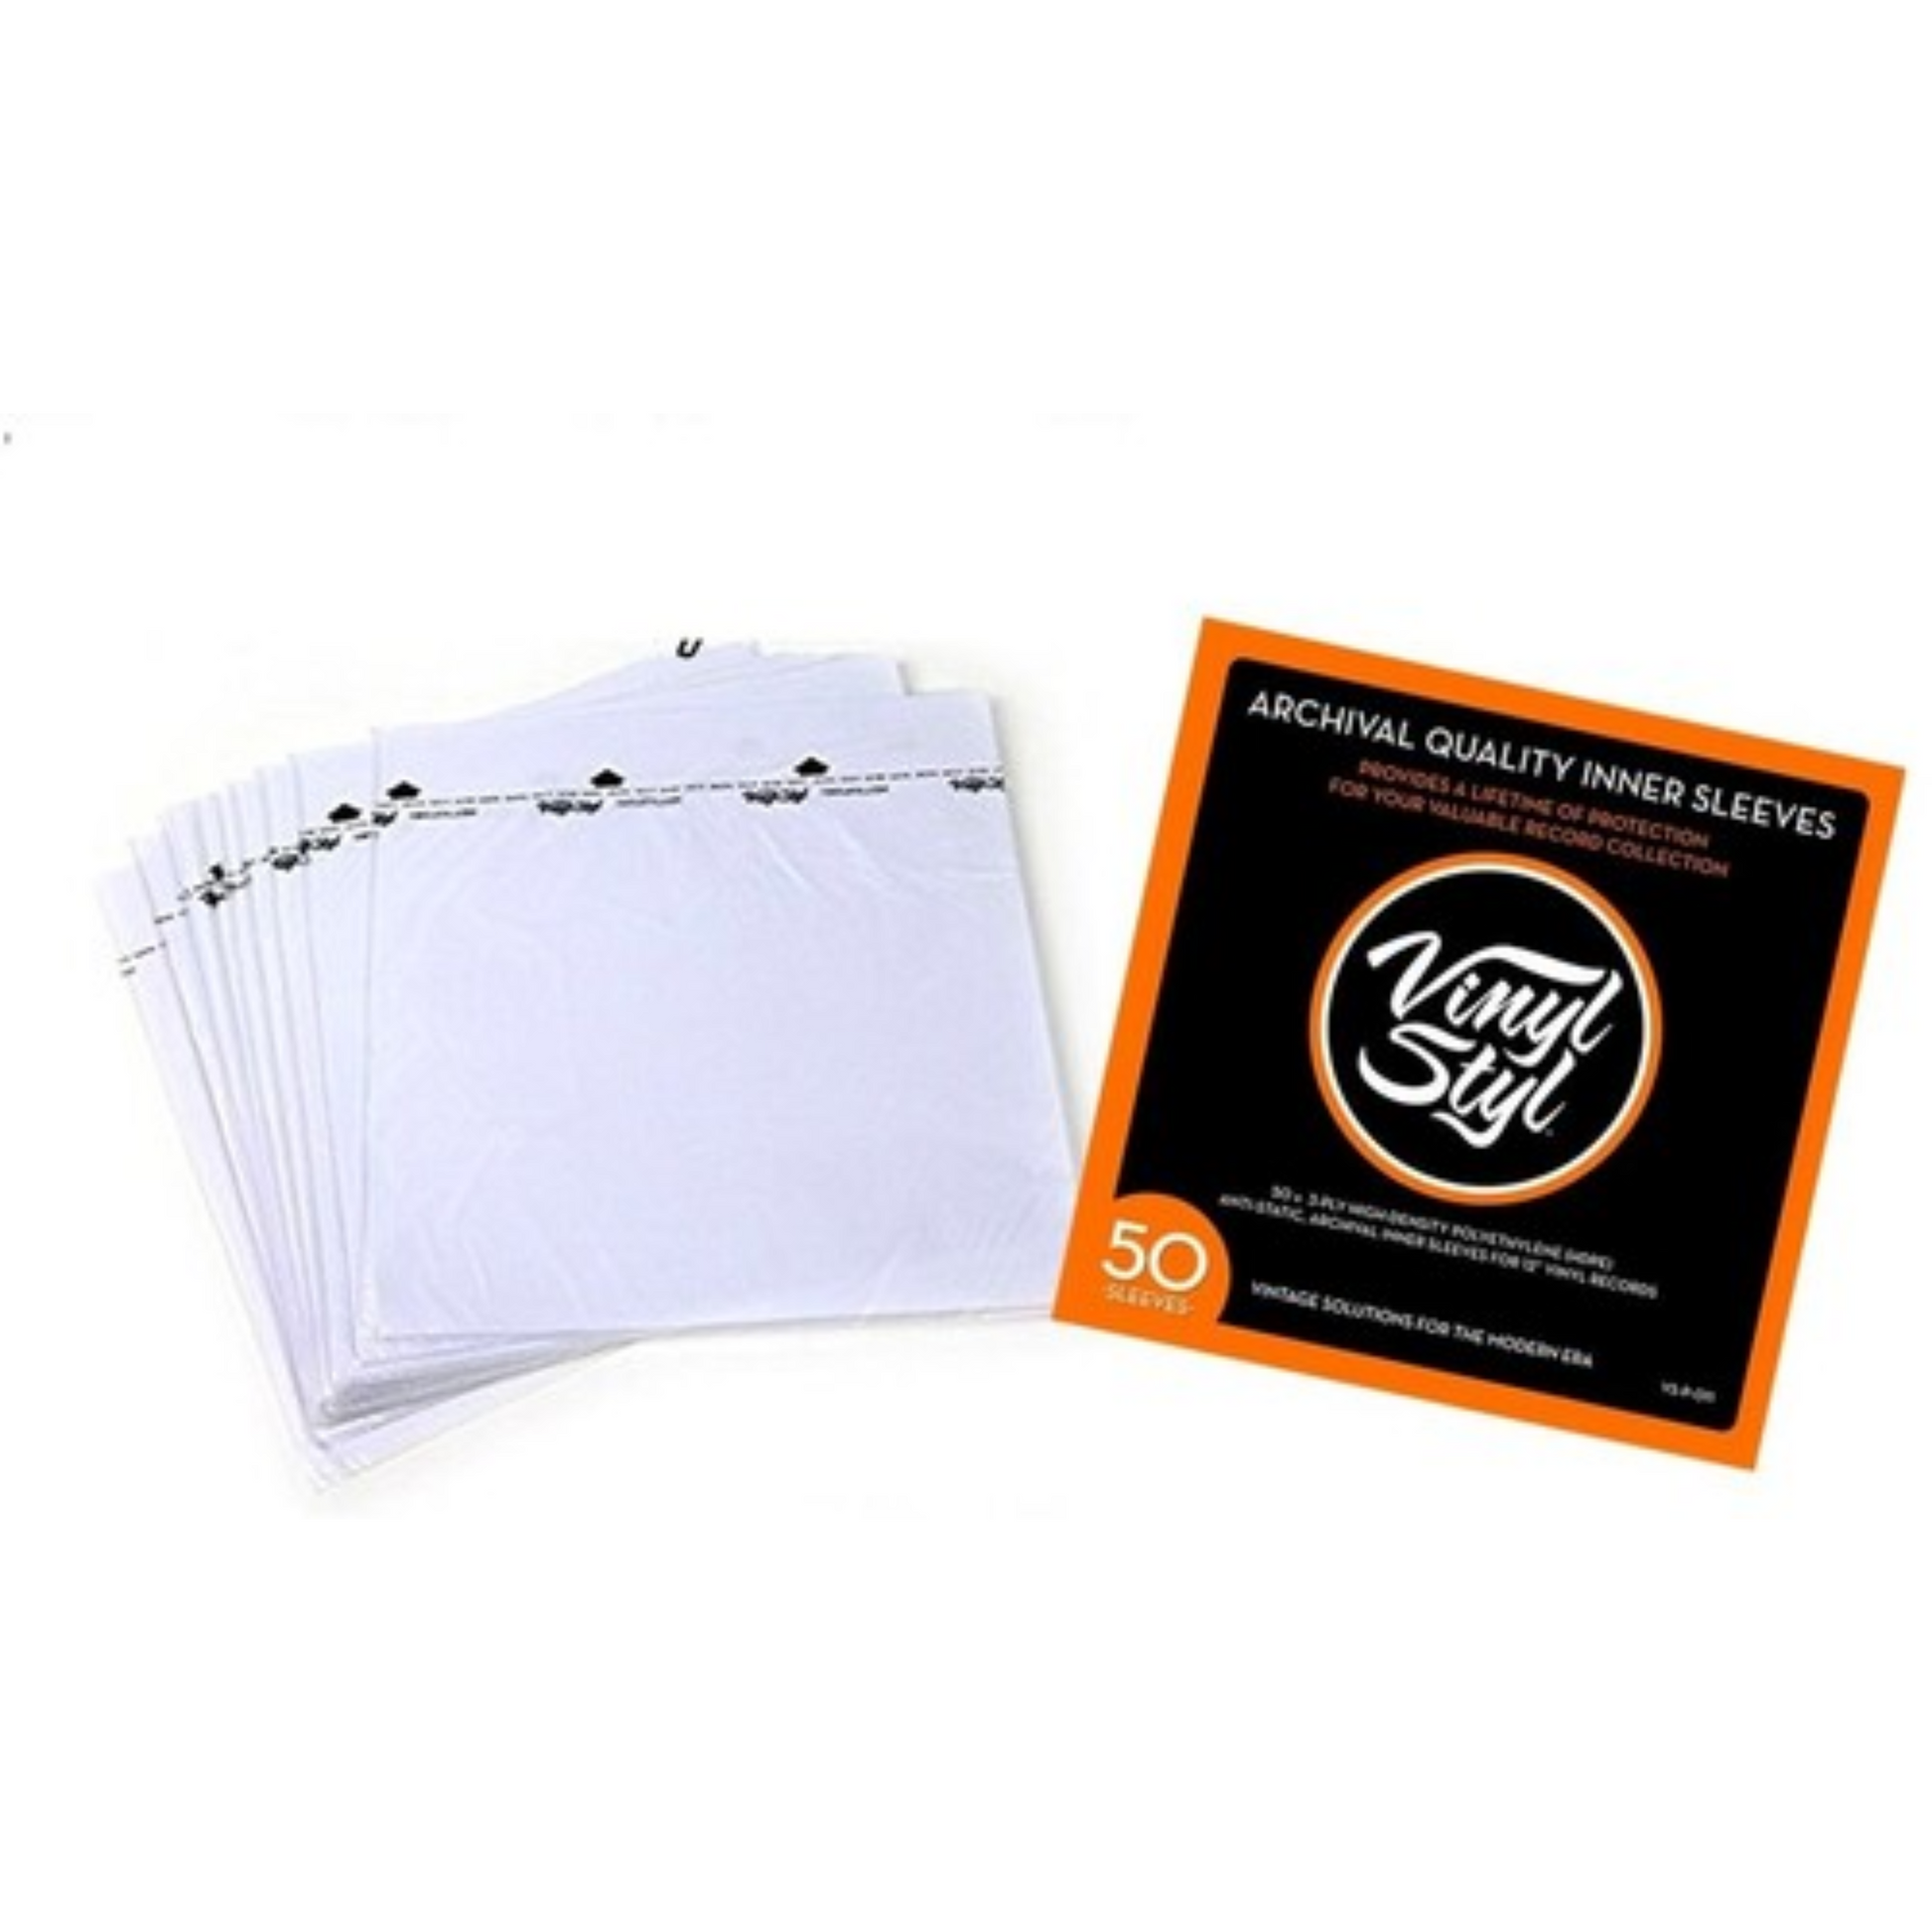 Vinyl Record Protector Sleeves (50 Pack) Outer